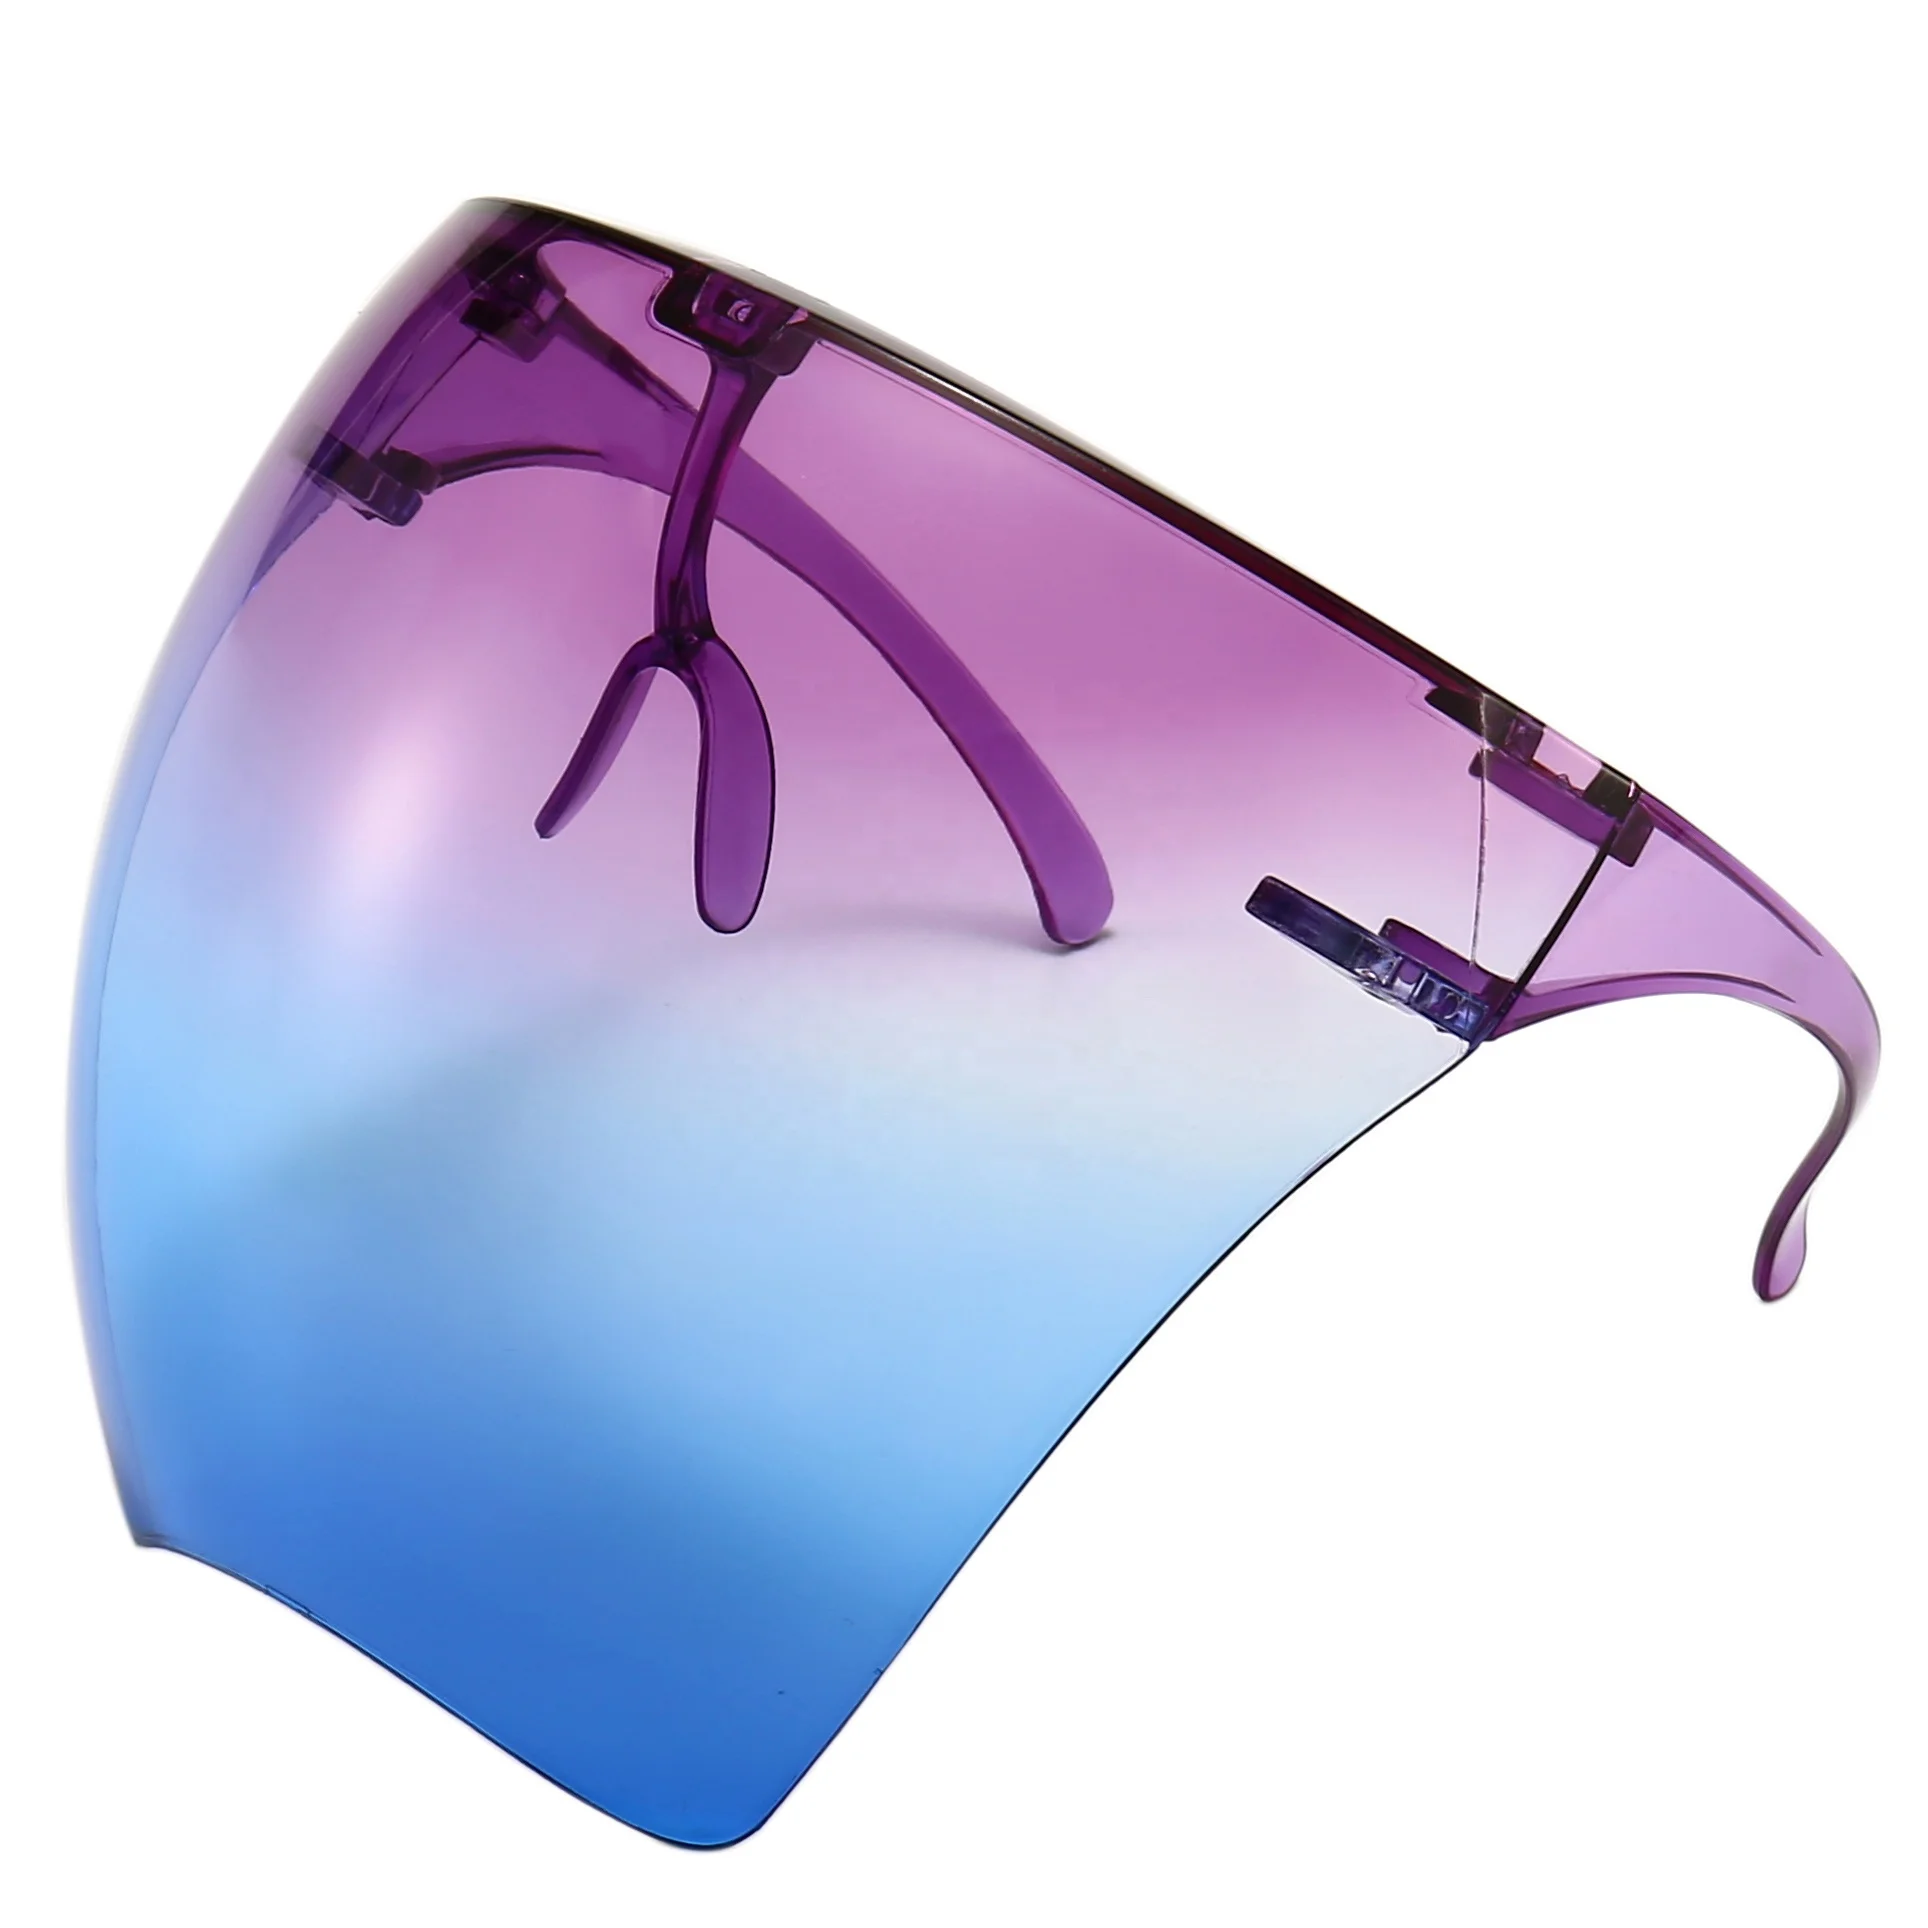 

Factory Anti Fog Mirrored Acrylic Face Shield Colorful Glasses Protective Visors Transparent One Piece Oversized Sunglasses, Mix color